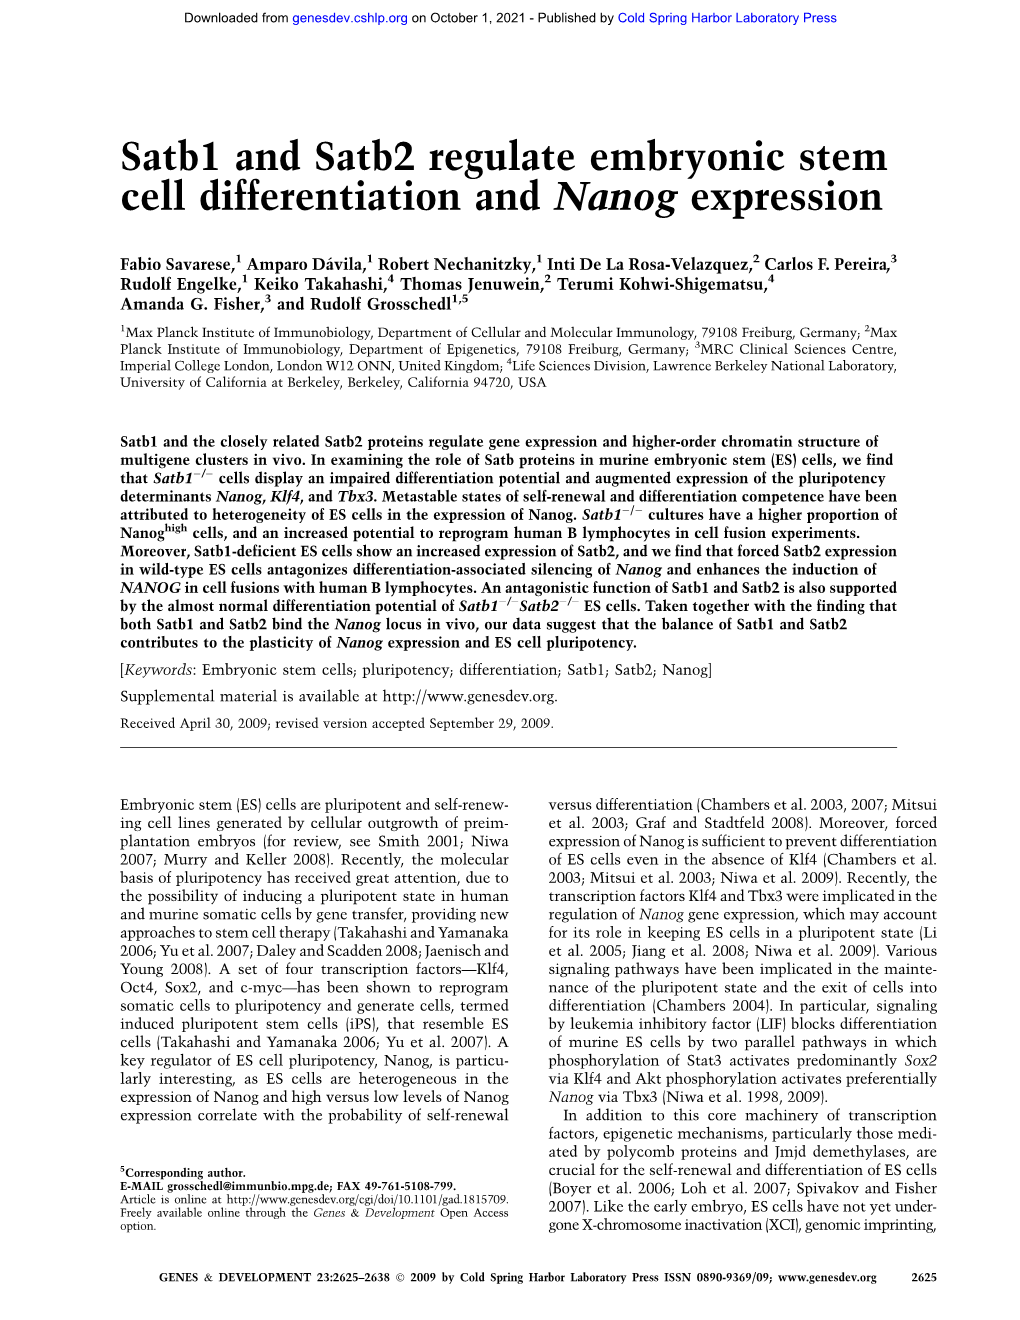 Satb1 and Satb2 Regulate Embryonic Stem Cell Differentiation and Nanog Expression